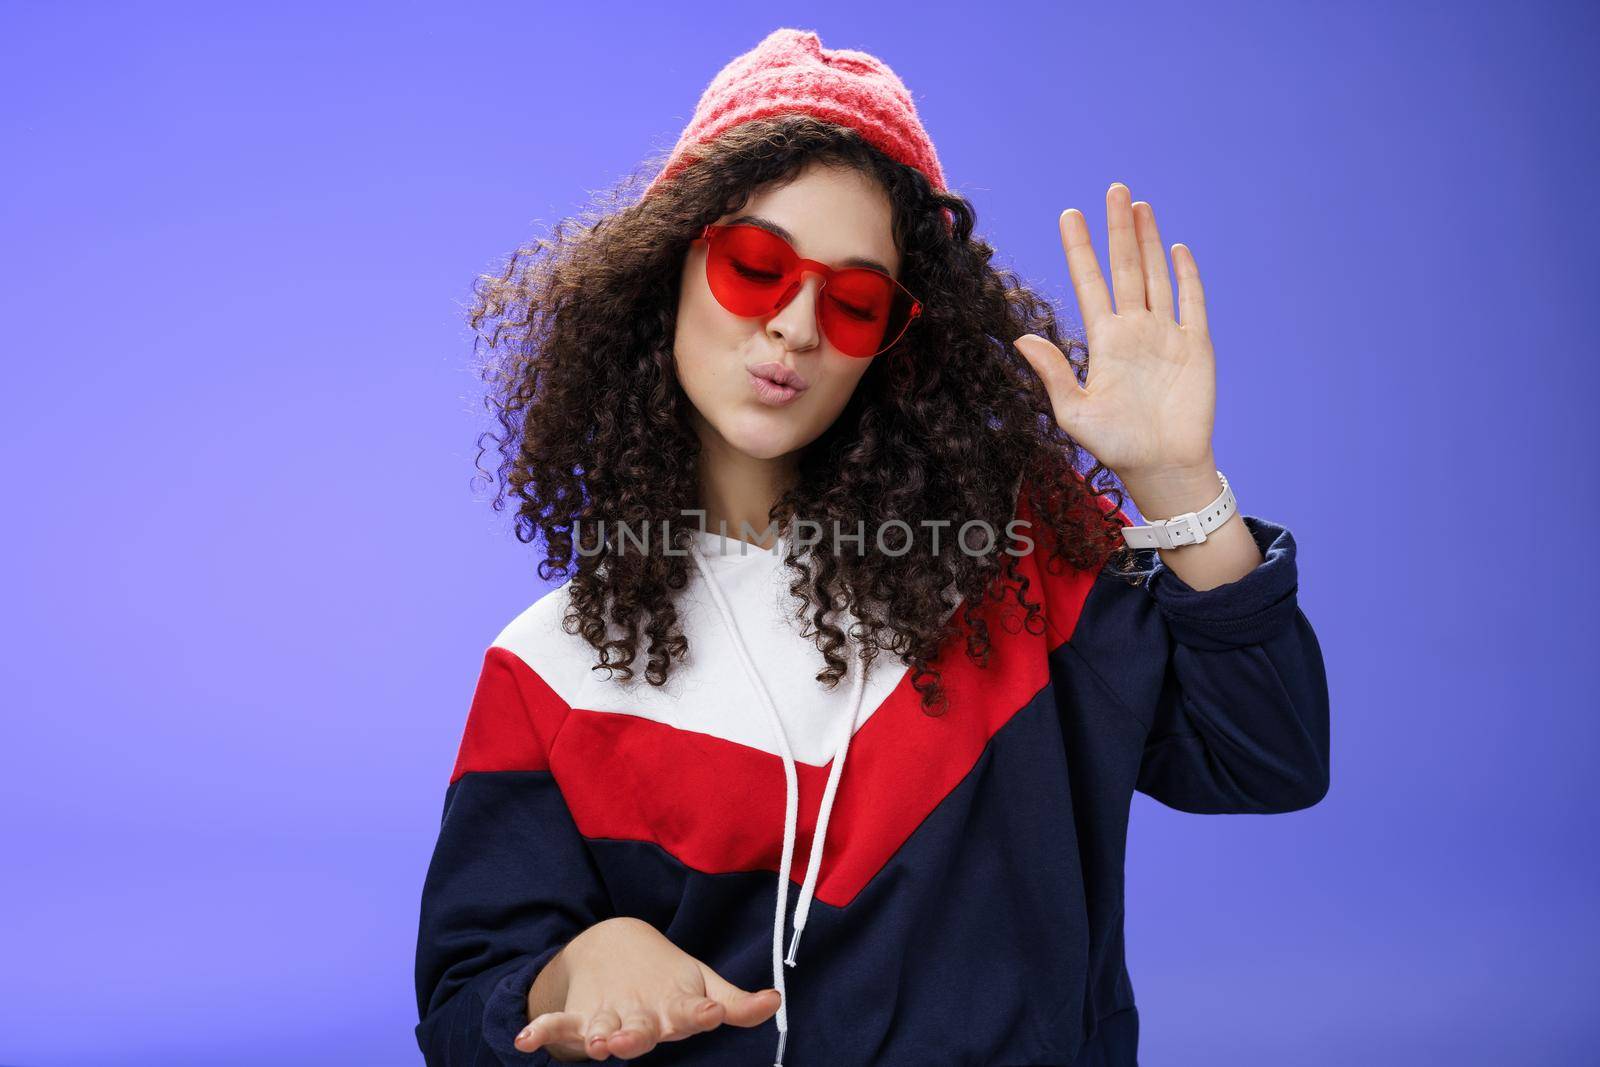 Studio shot of cool and stylish dj girl in red beanie and sunglasses raising palm as enjoying cool music and dancing to rhythm folding lips having fun at awesome party posing chill over blue wall.